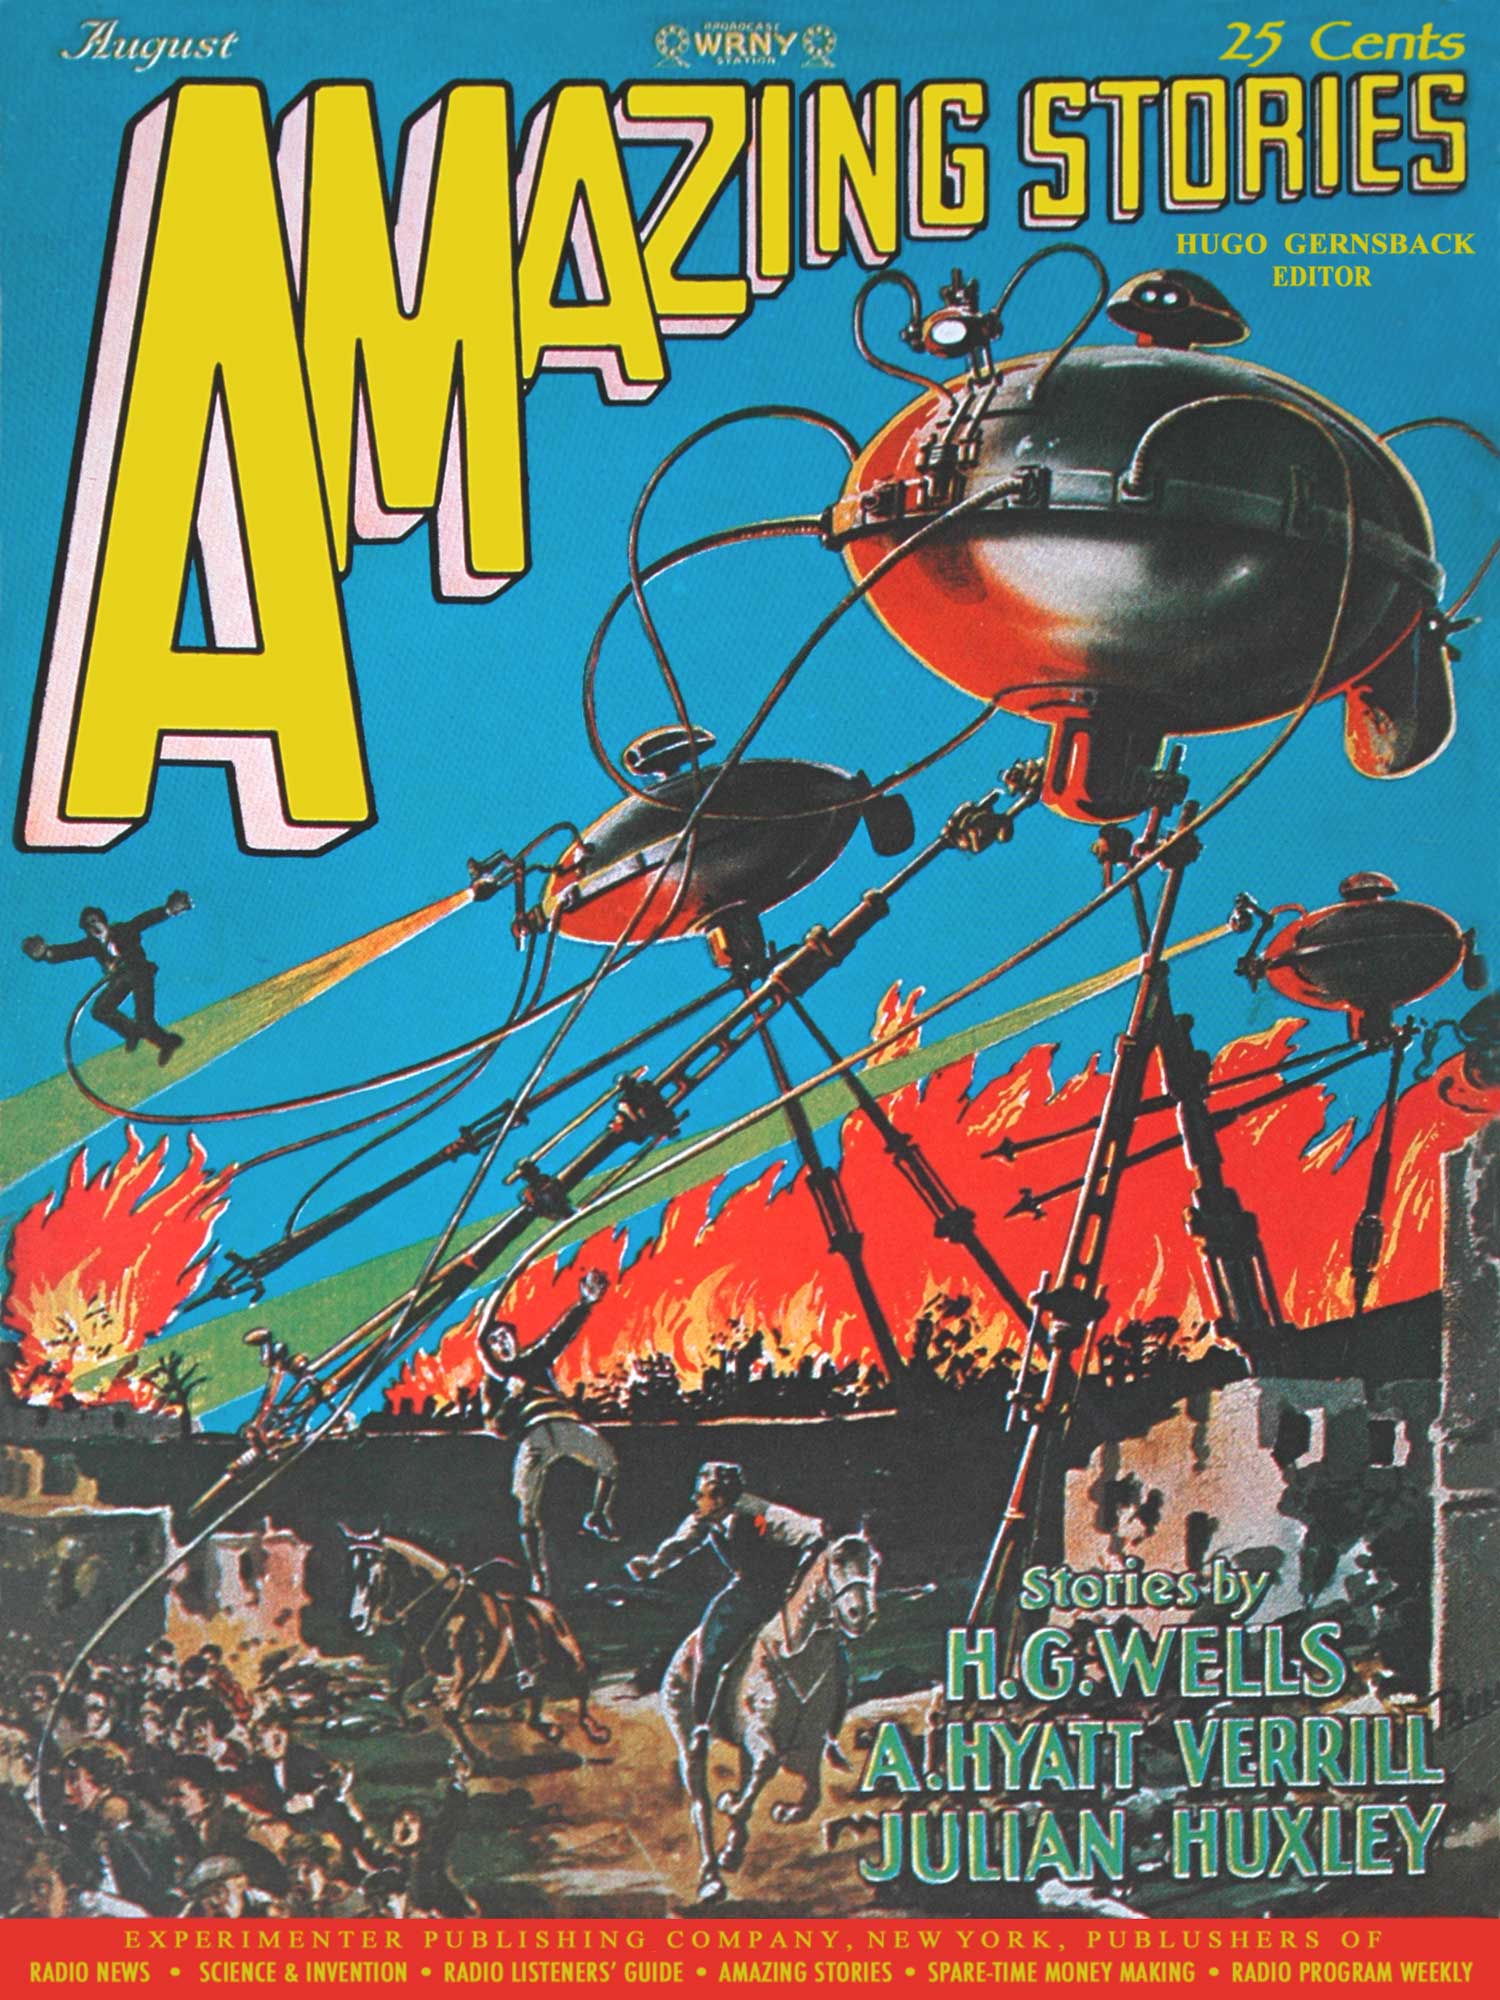 Amazing Stories, founded by H. Gernsback